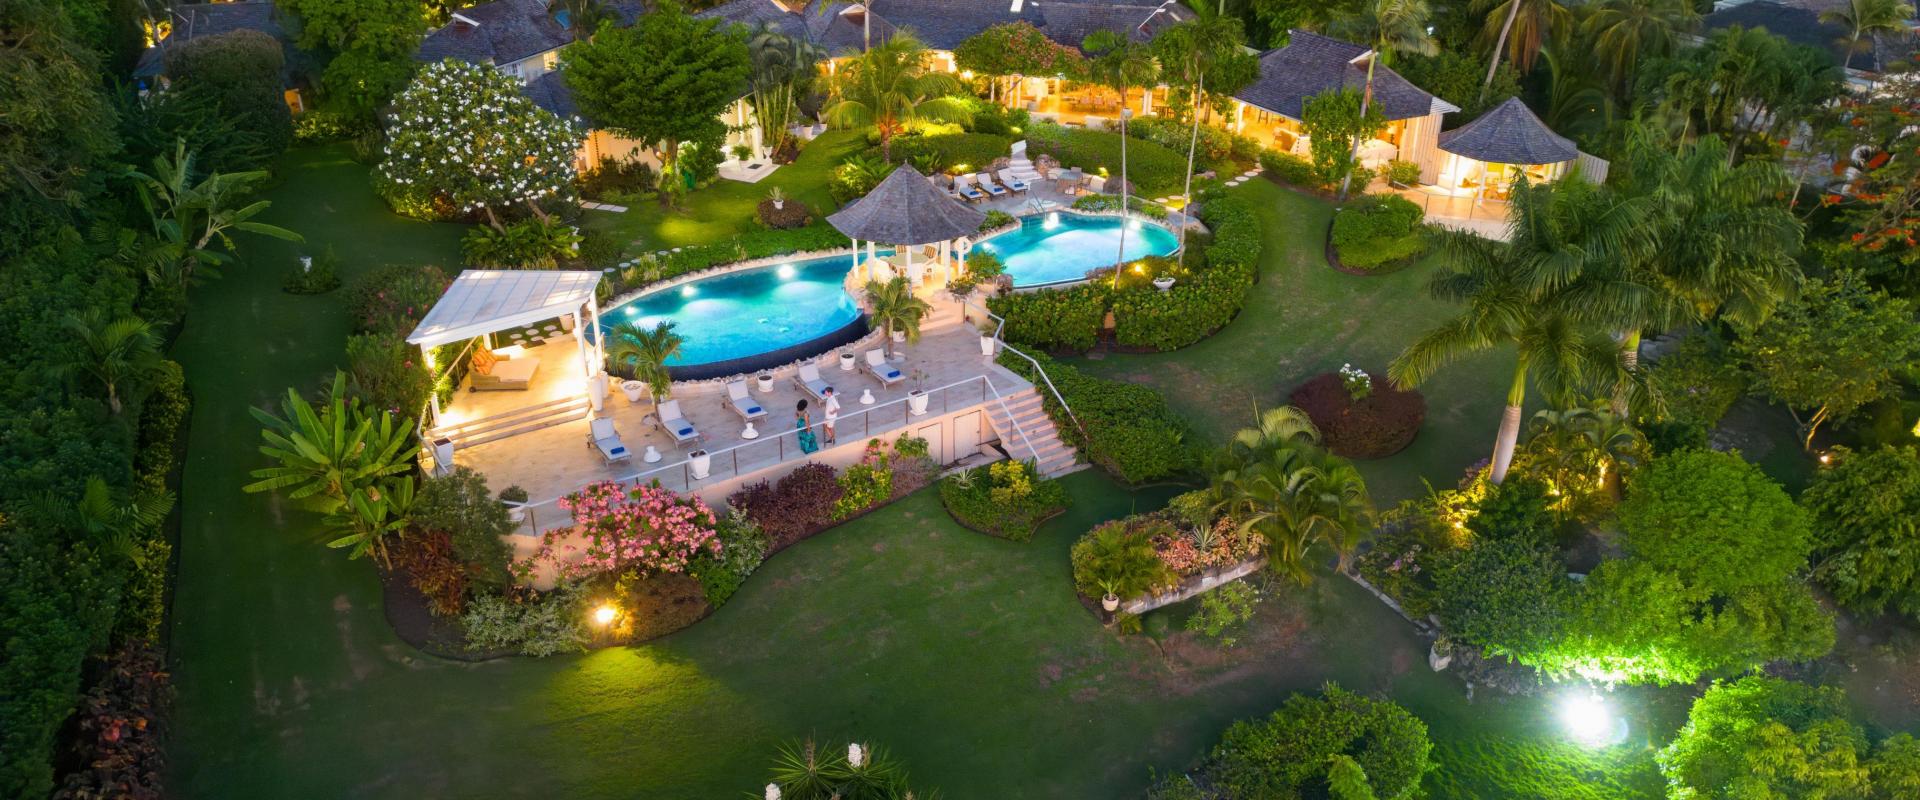 Point of View Holiday Rental In Sandy Lane Barbados Aerial View From Ocean at Dusk with Pool and Gardens